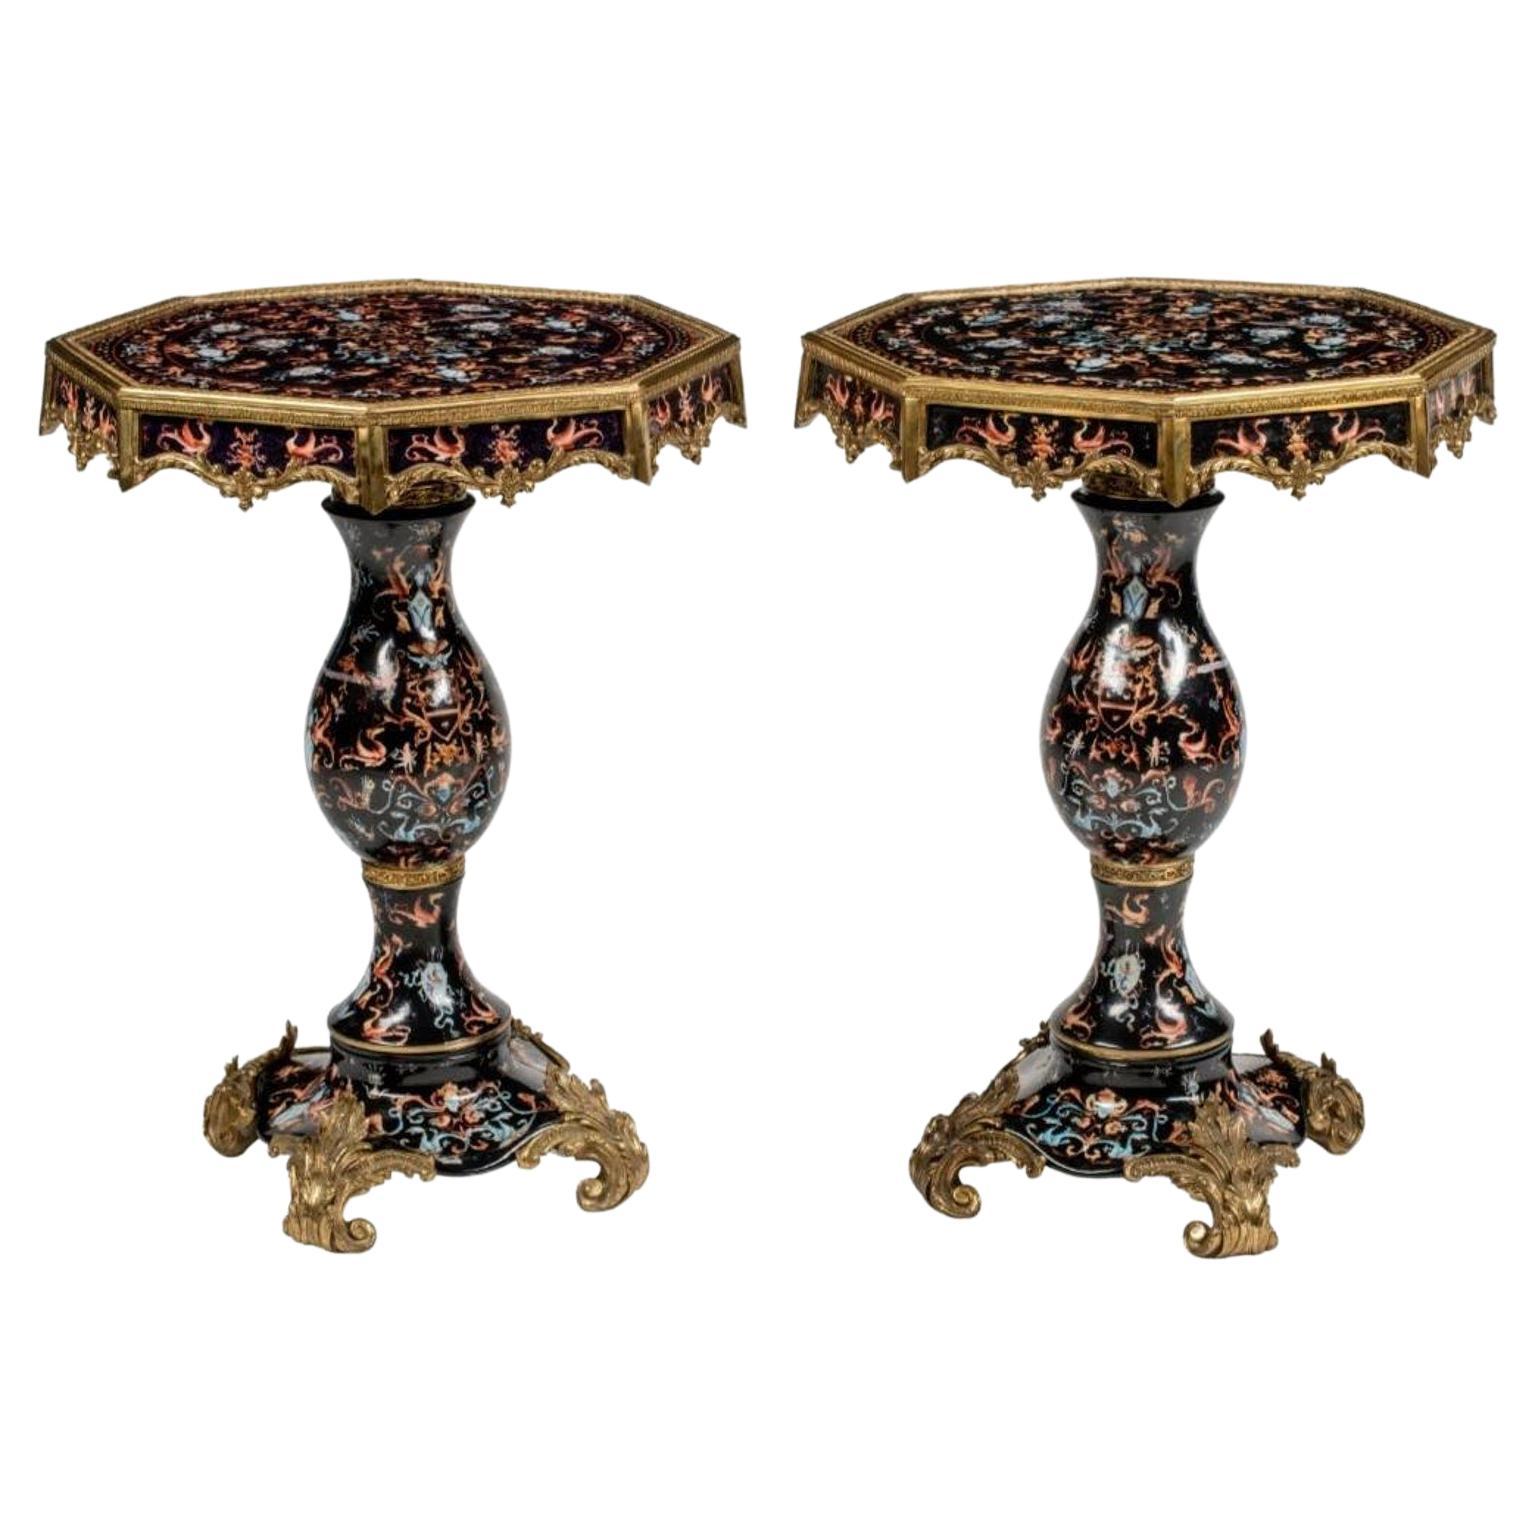 Pair of French Baroque Gilt Bronze Mounted Porcelain Side Tables